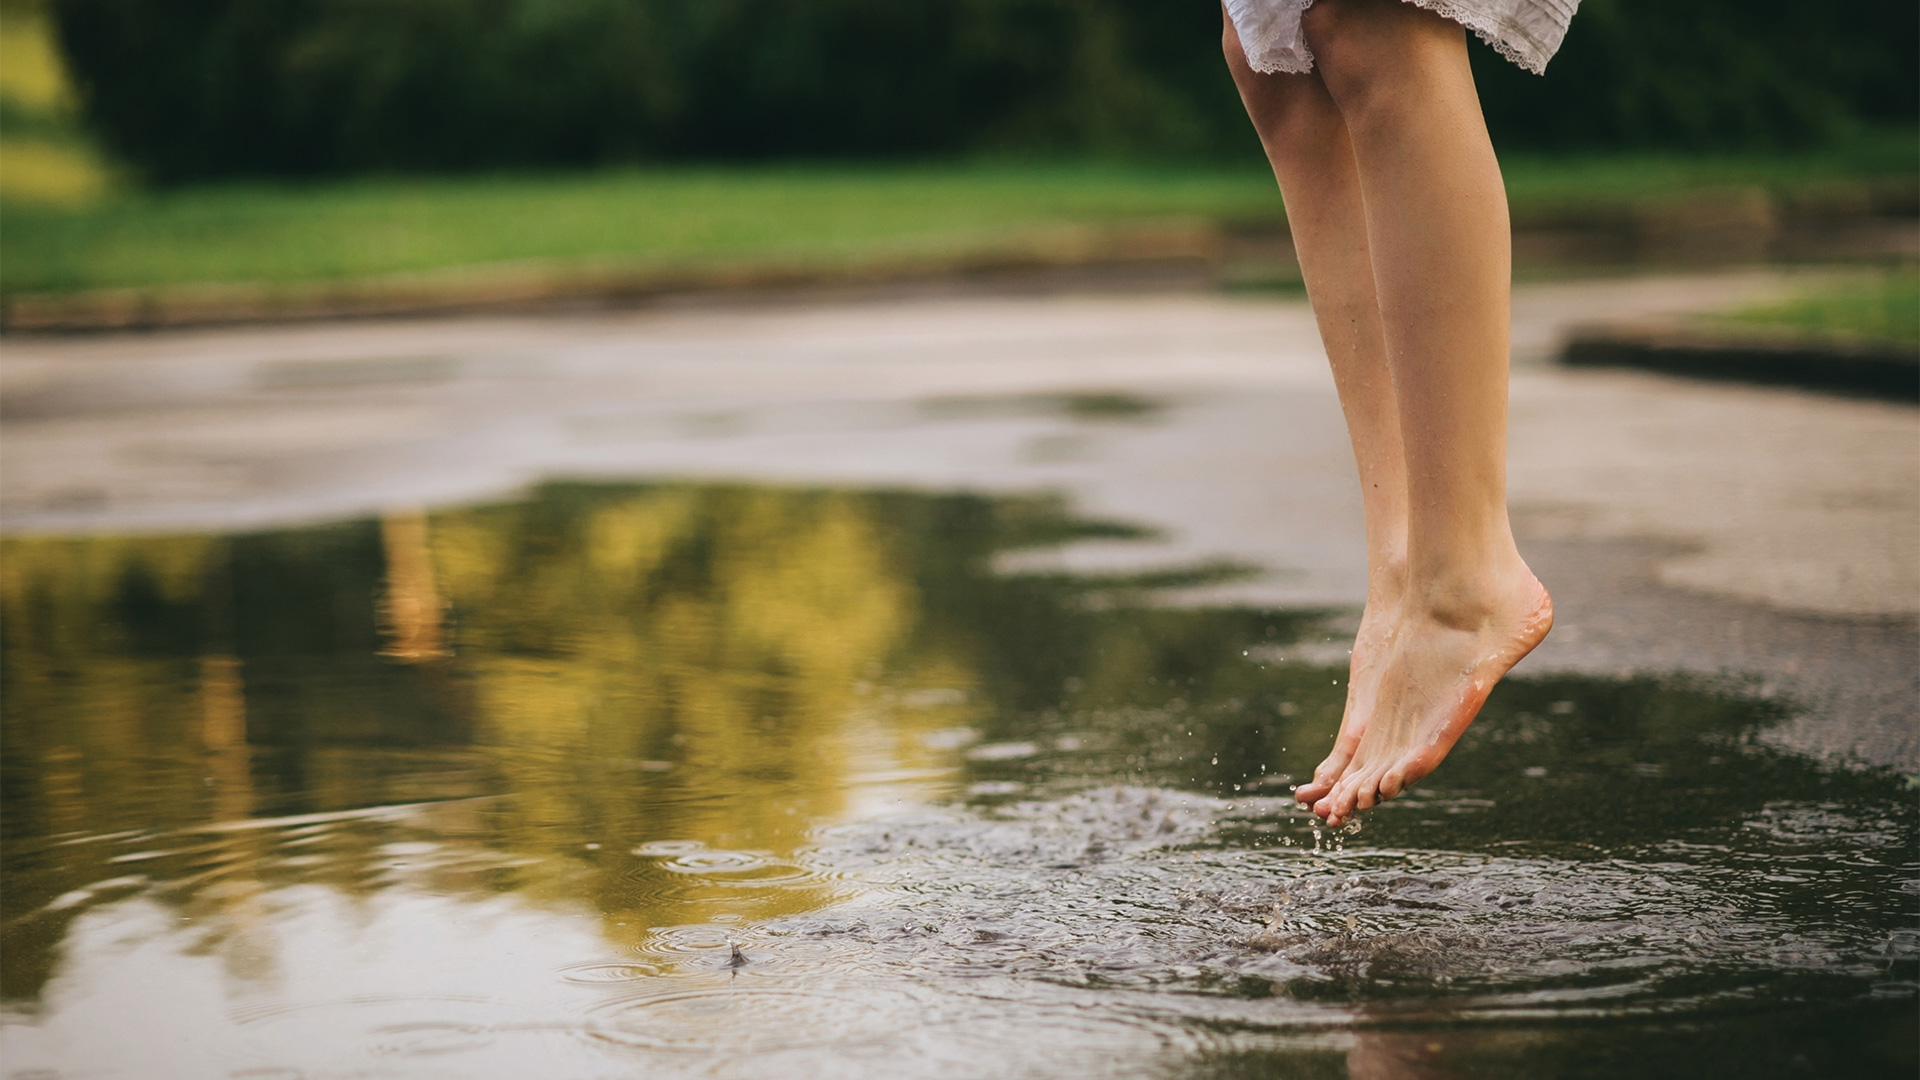 Woman jumping barefoot over a puddle